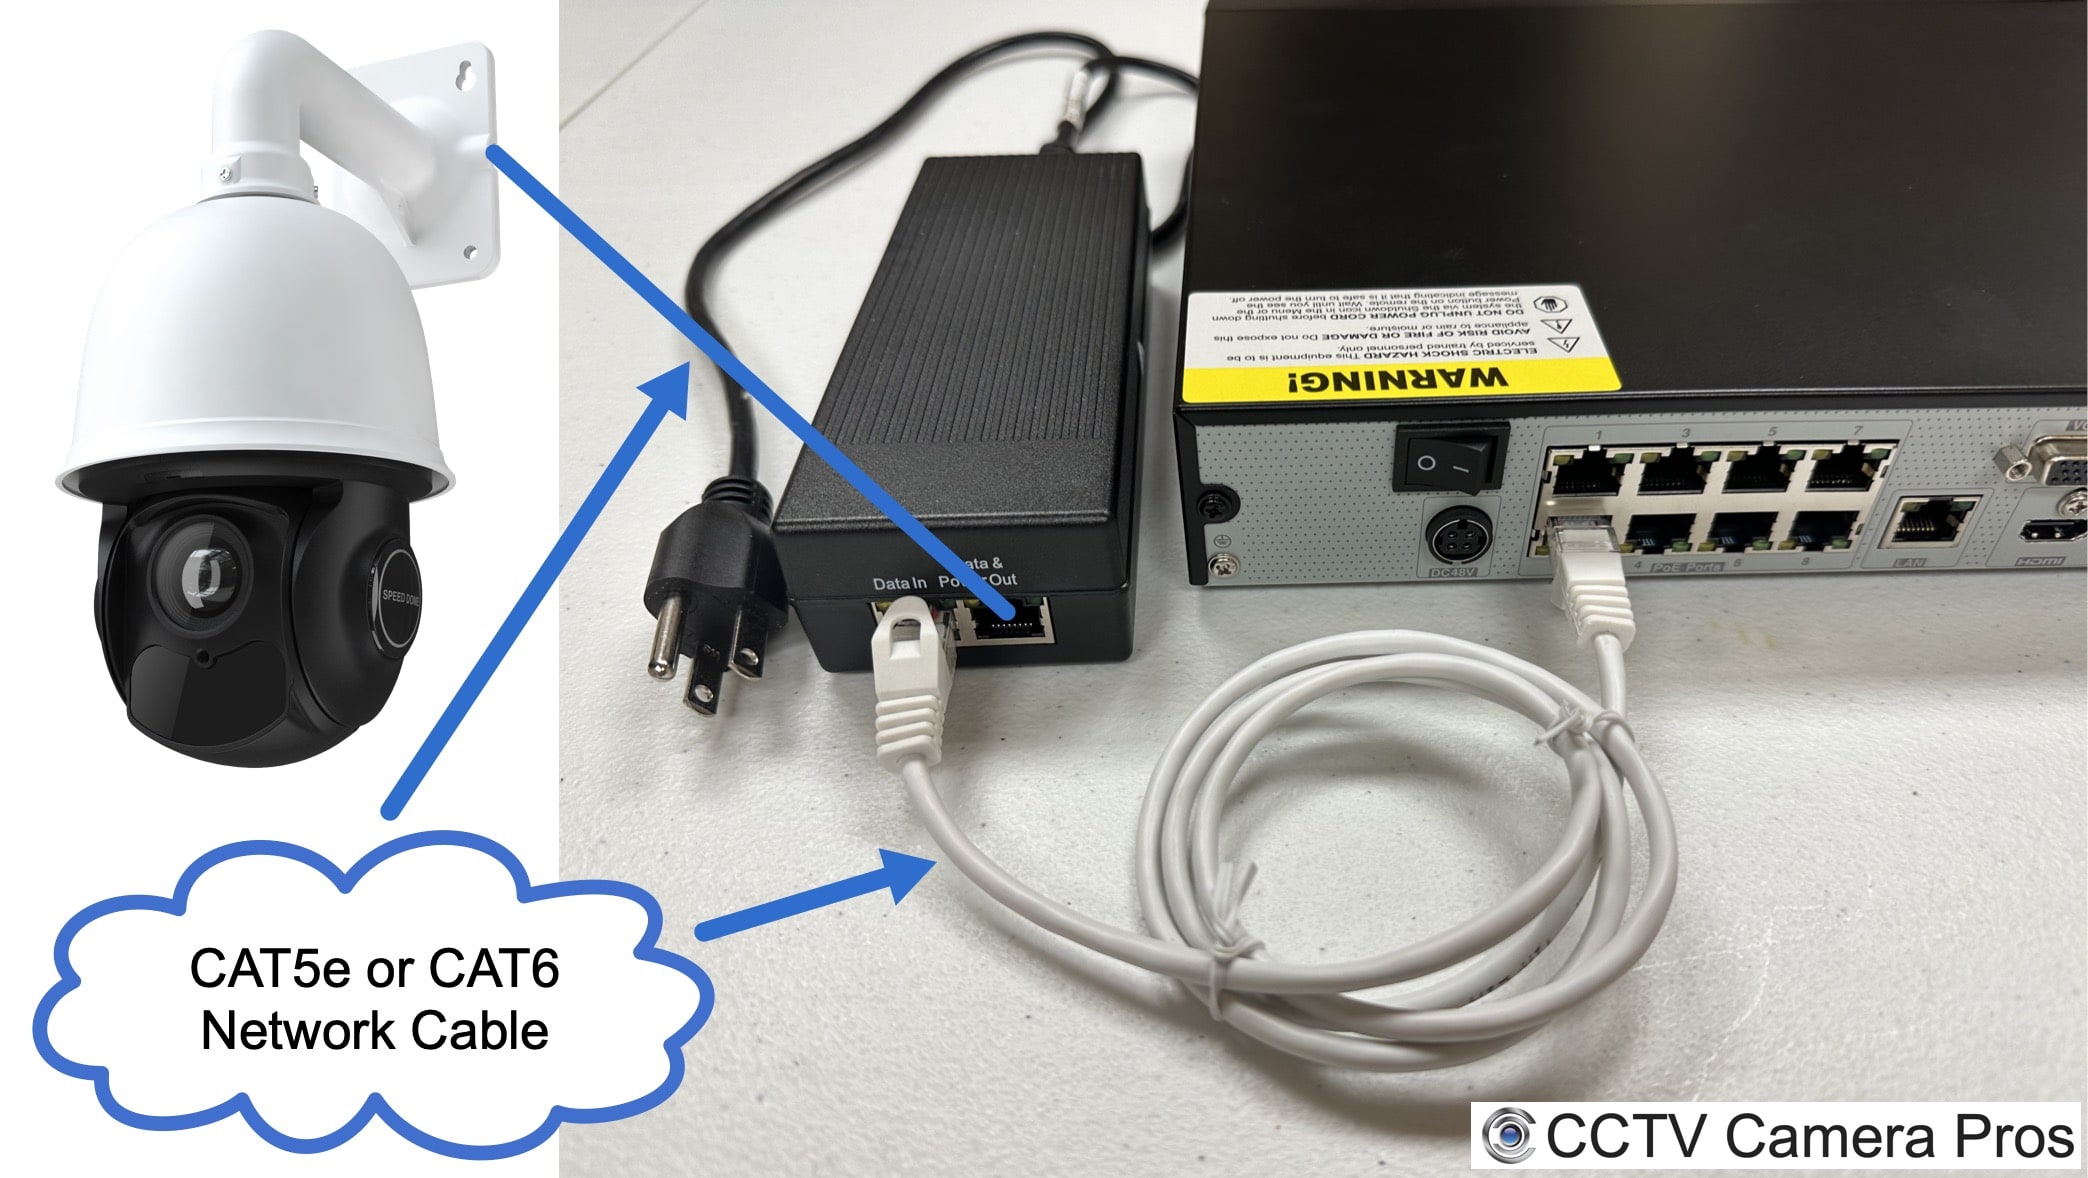 Mid-span multi port Passive POE injector for 8 CCTV cameras with